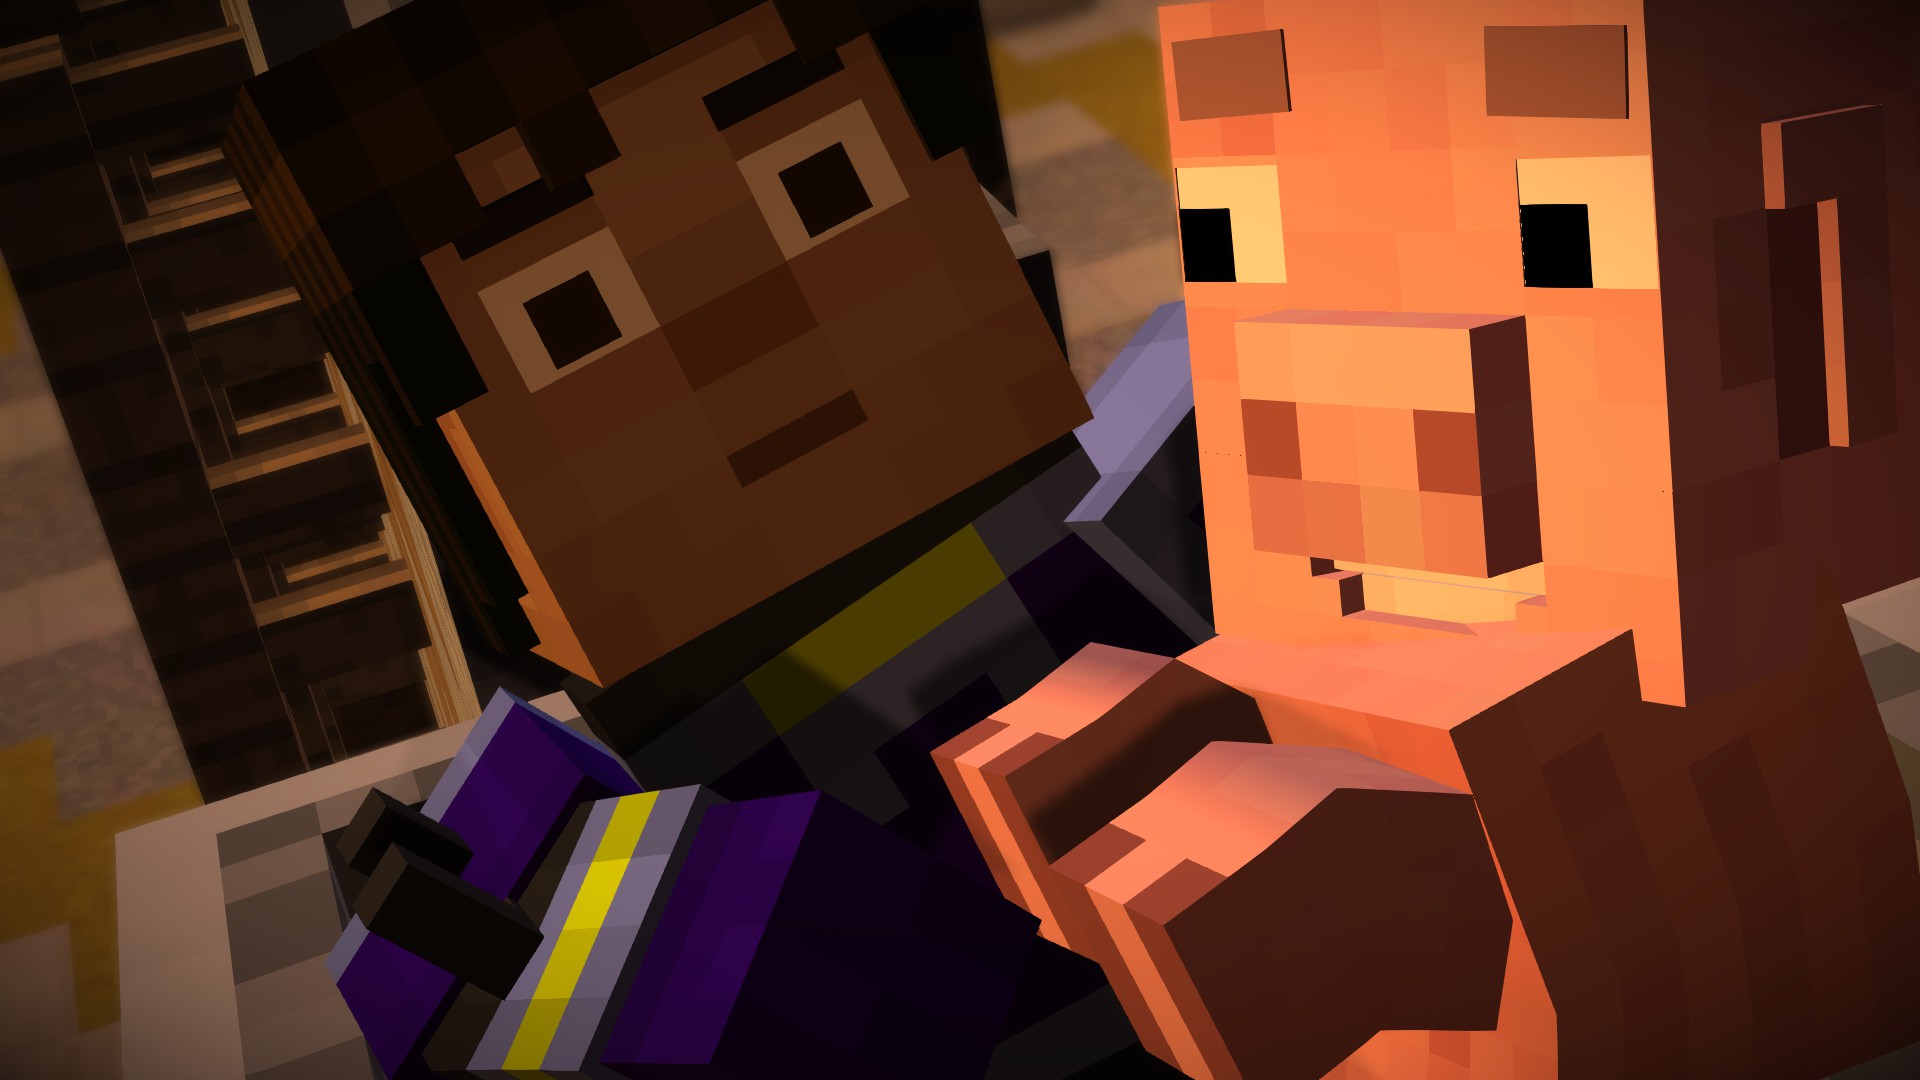 REVIEW, Minecraft: Story Mode - Season Two: Episode 4